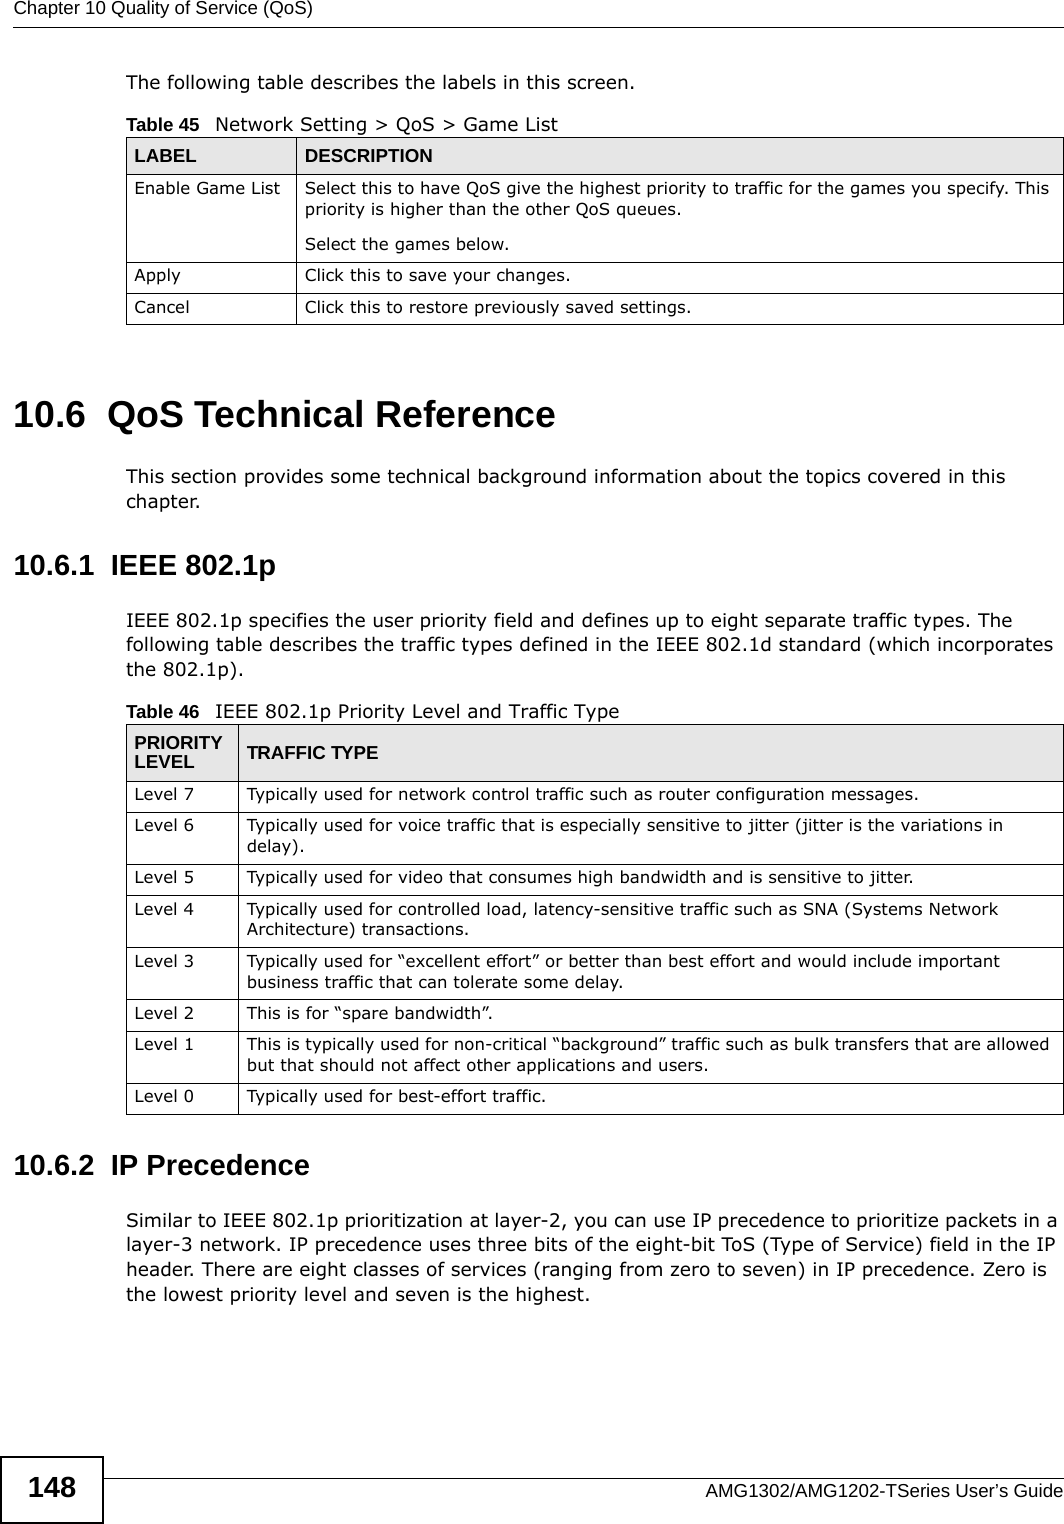 Chapter 10 Quality of Service (QoS)AMG1302/AMG1202-TSeries User’s Guide148The following table describes the labels in this screen. 10.6  QoS Technical ReferenceThis section provides some technical background information about the topics covered in this chapter.10.6.1  IEEE 802.1pIEEE 802.1p specifies the user priority field and defines up to eight separate traffic types. The following table describes the traffic types defined in the IEEE 802.1d standard (which incorporates the 802.1p). 10.6.2  IP PrecedenceSimilar to IEEE 802.1p prioritization at layer-2, you can use IP precedence to prioritize packets in a layer-3 network. IP precedence uses three bits of the eight-bit ToS (Type of Service) field in the IP header. There are eight classes of services (ranging from zero to seven) in IP precedence. Zero is the lowest priority level and seven is the highest.Table 45   Network Setting &gt; QoS &gt; Game ListLABEL DESCRIPTIONEnable Game List Select this to have QoS give the highest priority to traffic for the games you specify. This priority is higher than the other QoS queues.Select the games below.Apply Click this to save your changes.Cancel Click this to restore previously saved settings.Table 46   IEEE 802.1p Priority Level and Traffic TypePRIORITY LEVEL TRAFFIC TYPELevel 7 Typically used for network control traffic such as router configuration messages.Level 6 Typically used for voice traffic that is especially sensitive to jitter (jitter is the variations in delay).Level 5 Typically used for video that consumes high bandwidth and is sensitive to jitter.Level 4 Typically used for controlled load, latency-sensitive traffic such as SNA (Systems Network Architecture) transactions.Level 3 Typically used for “excellent effort” or better than best effort and would include important business traffic that can tolerate some delay.Level 2 This is for “spare bandwidth”. Level 1 This is typically used for non-critical “background” traffic such as bulk transfers that are allowed but that should not affect other applications and users. Level 0 Typically used for best-effort traffic.